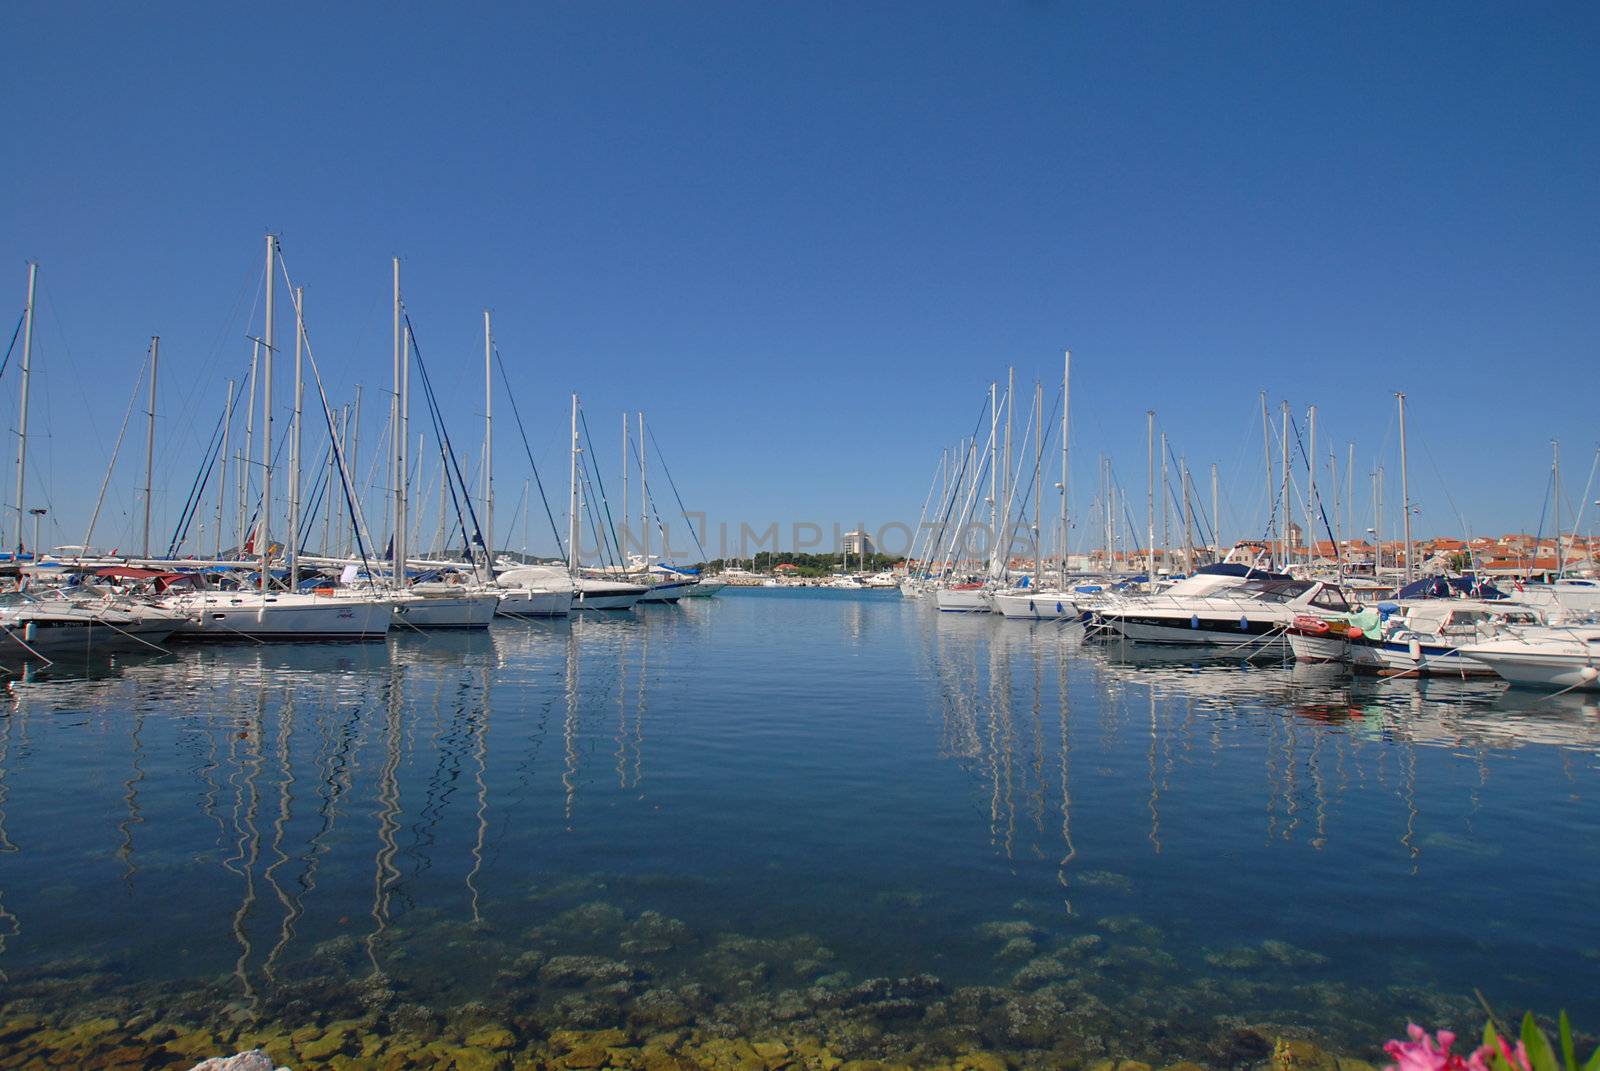 Mooring boats in the town of Vodice, Croatia.